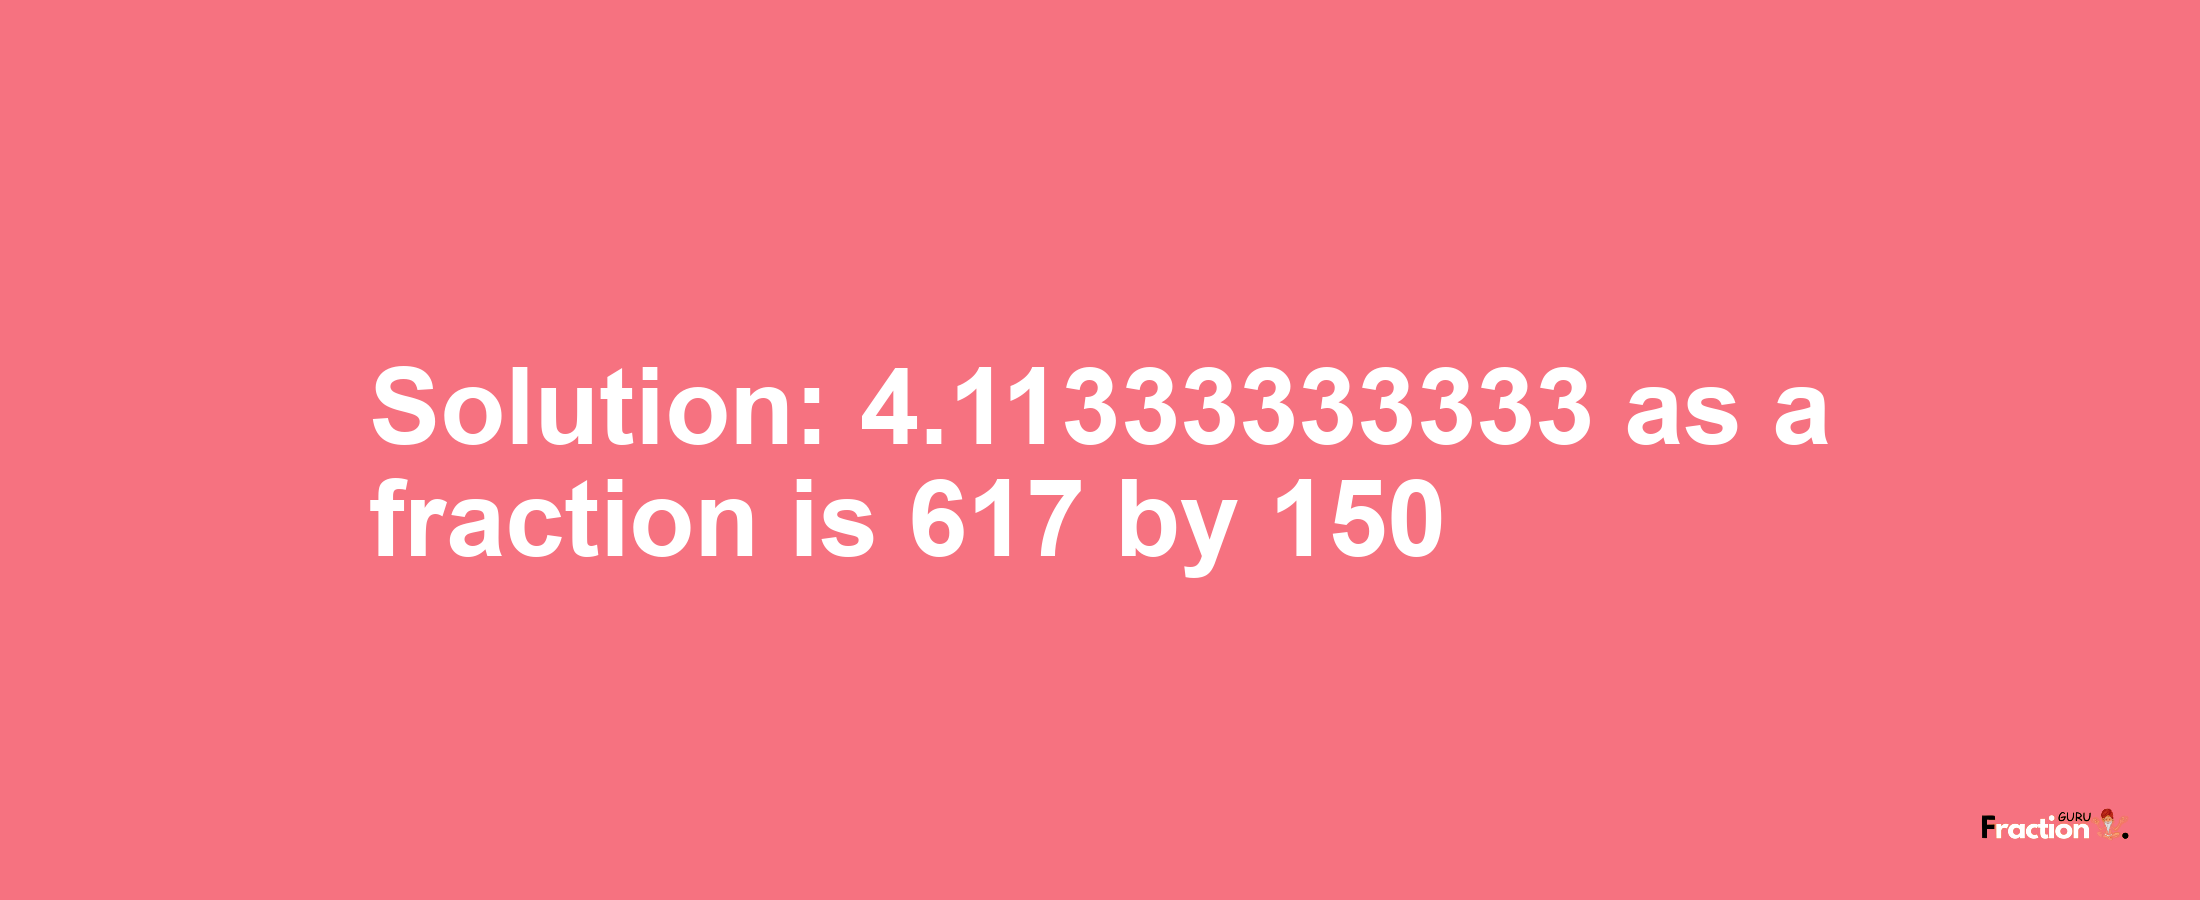 Solution:4.11333333333 as a fraction is 617/150